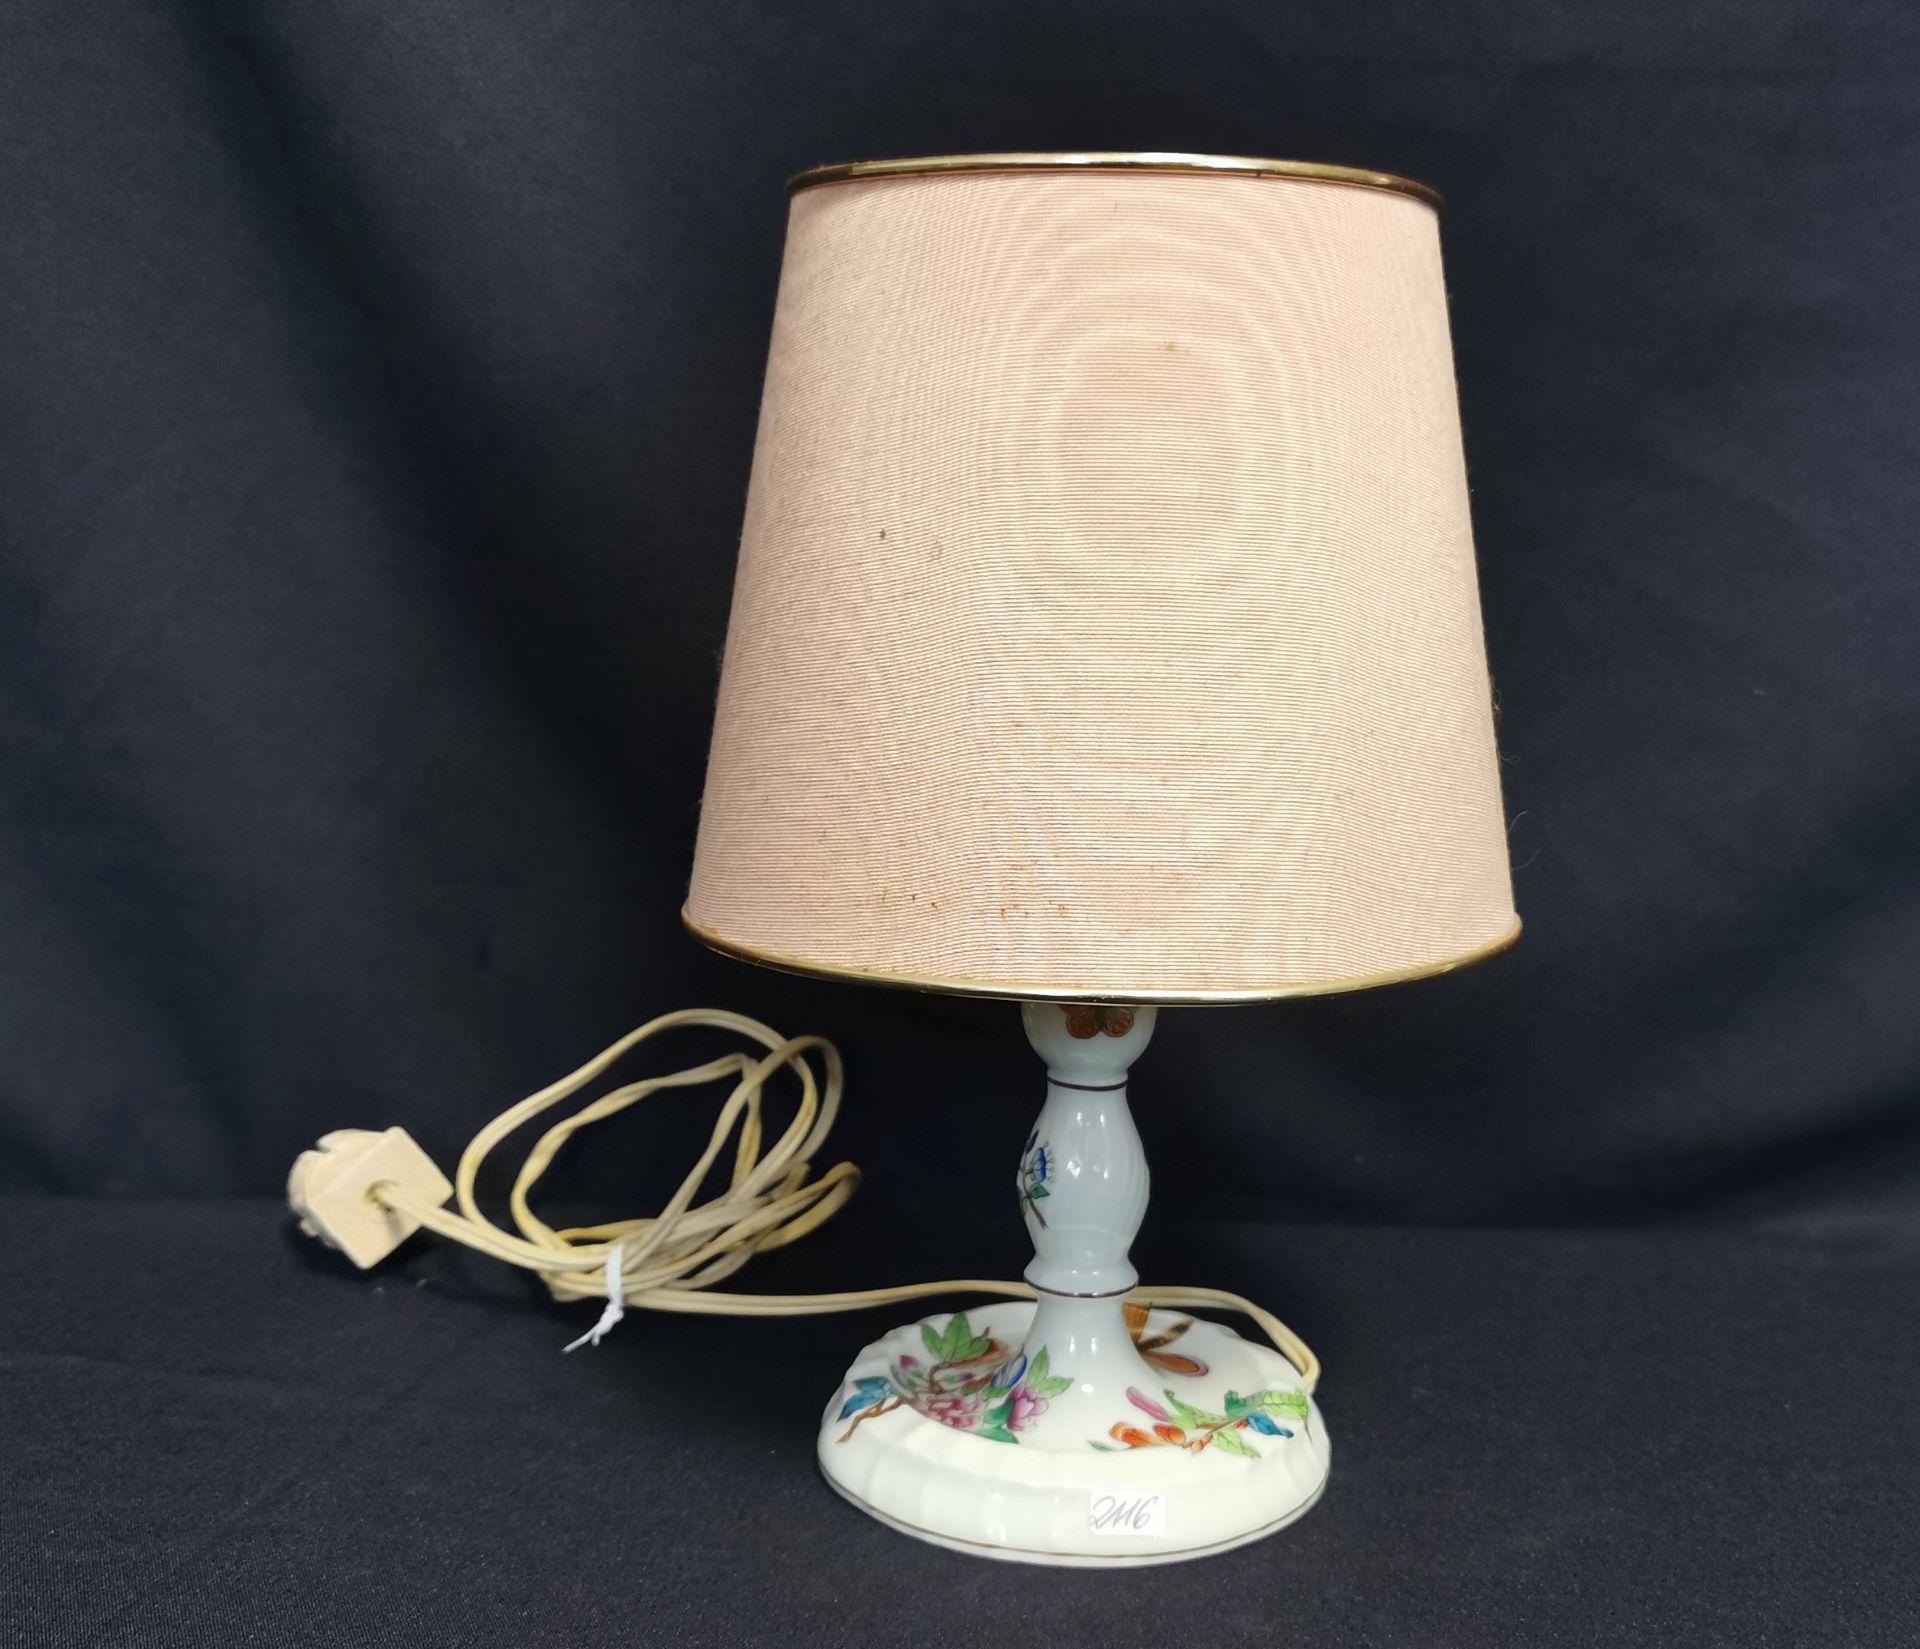 HEREND TABLE LAMP - Image 2 of 4